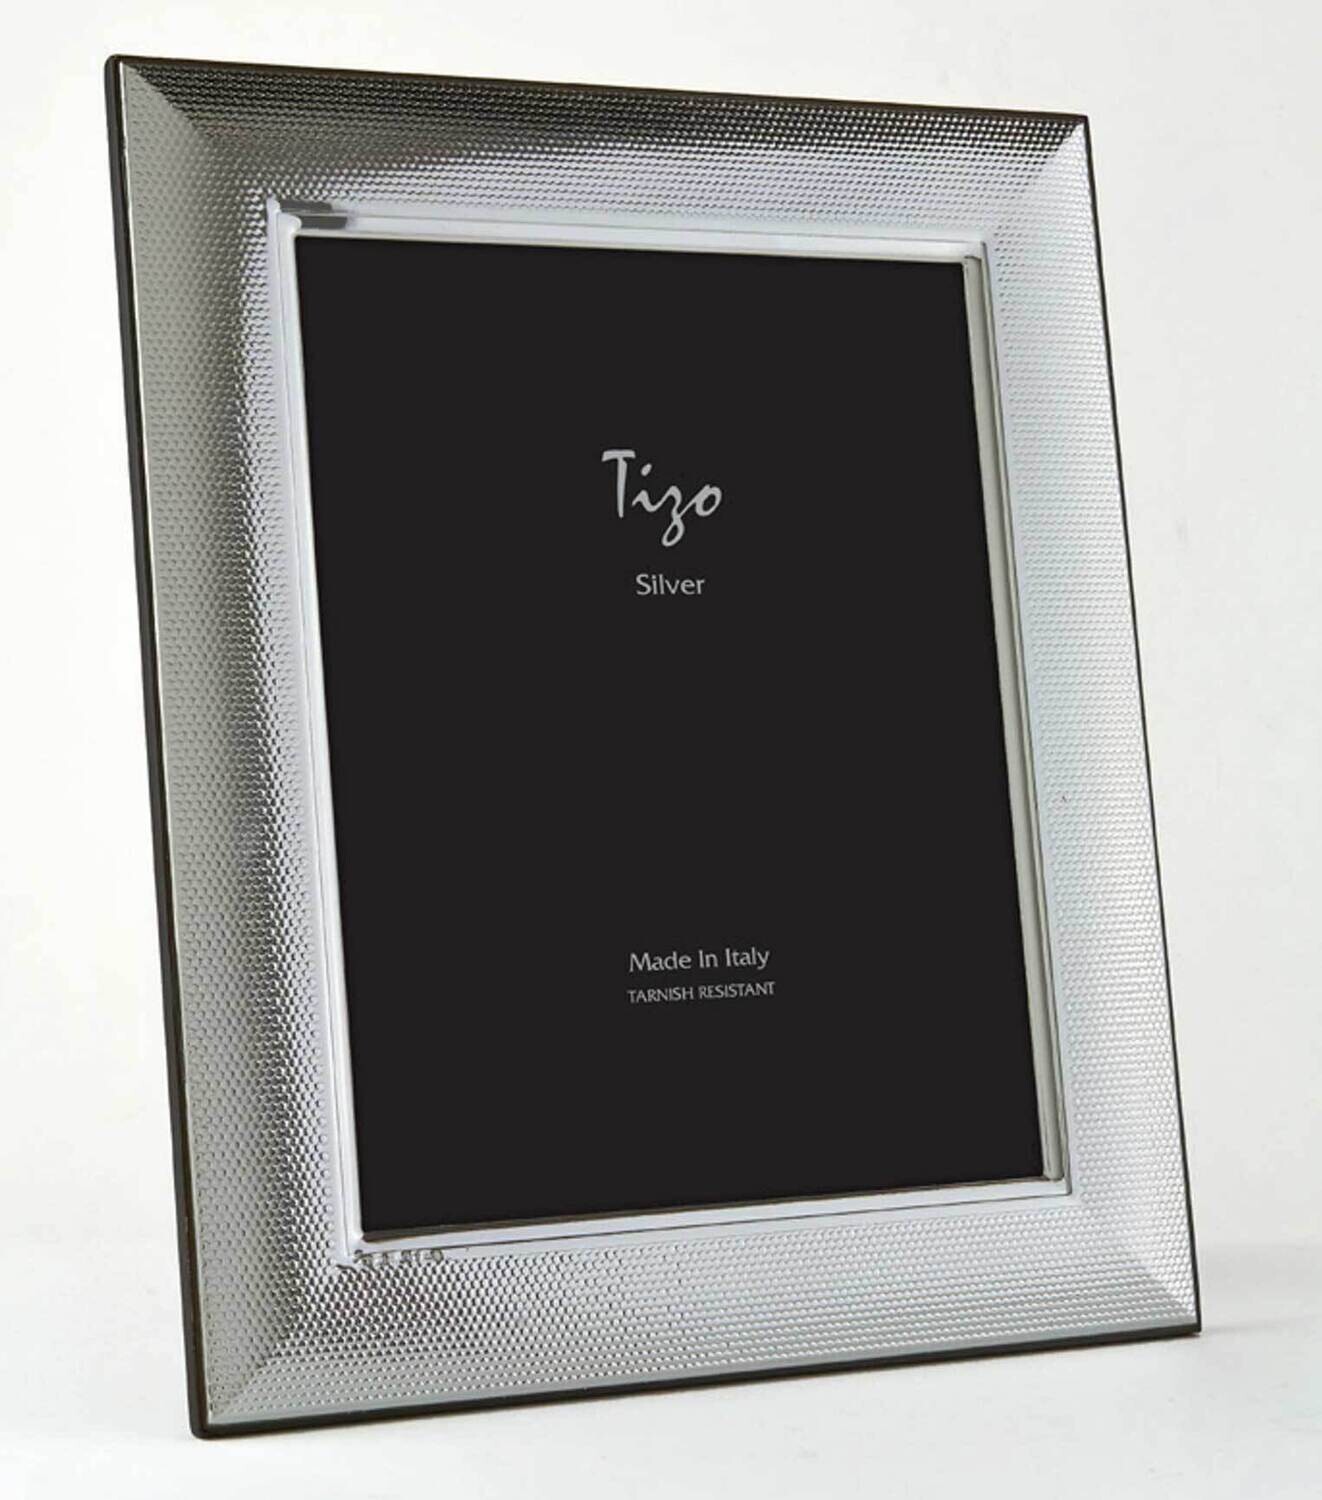 Tizo Wide Mesh Silver-Plated Picture Frame 8 x 10 Inch 1291-80